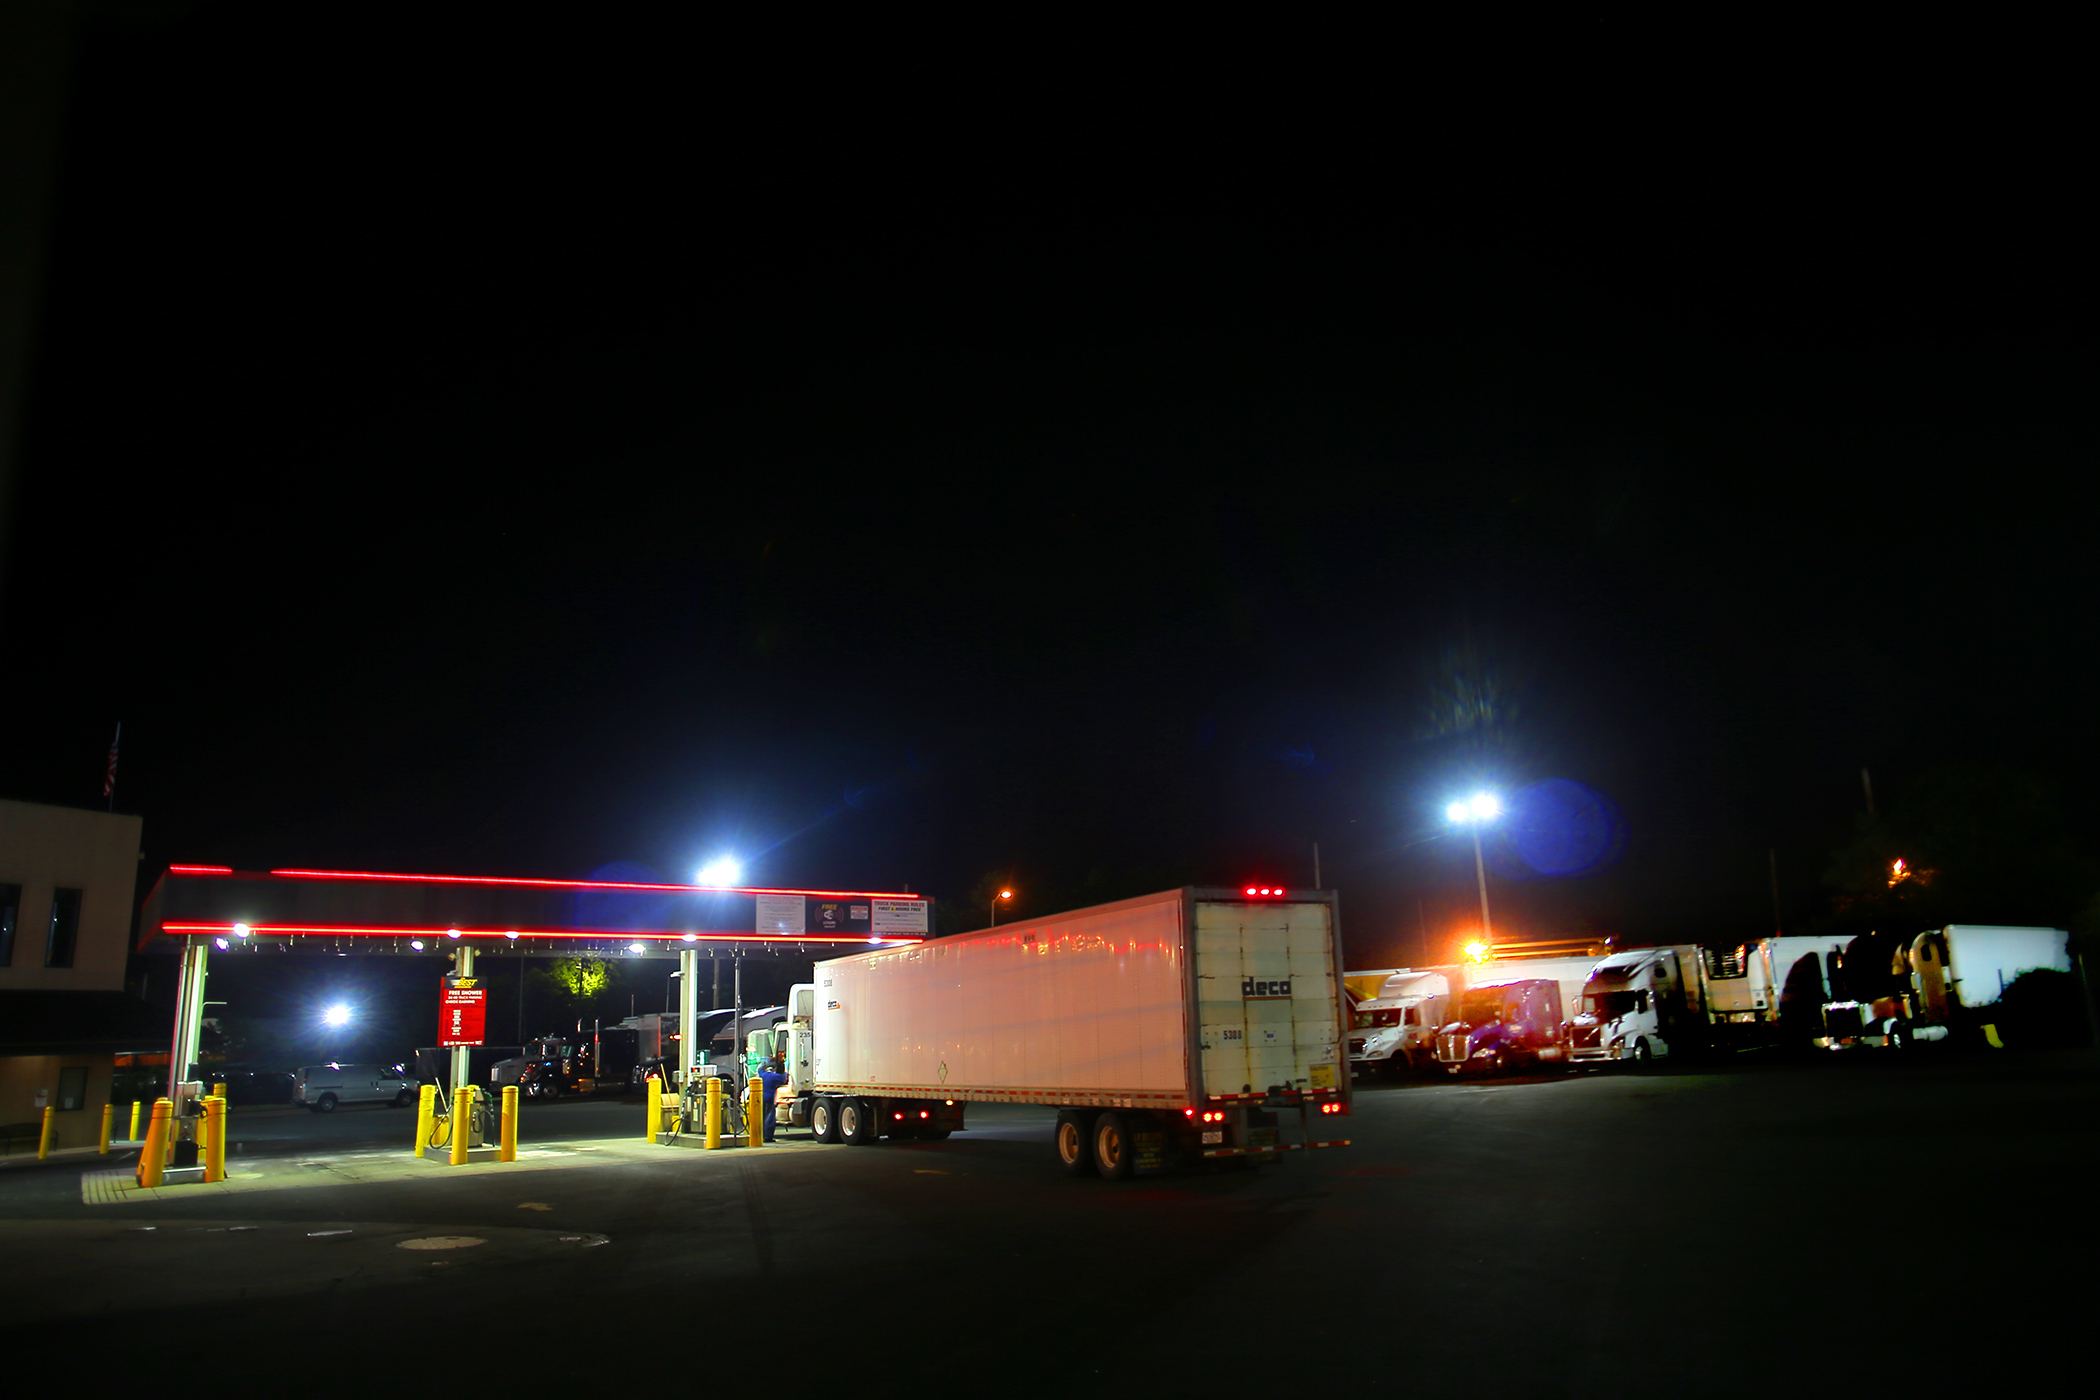 Trucks staying overnight at a rest stop/gas station